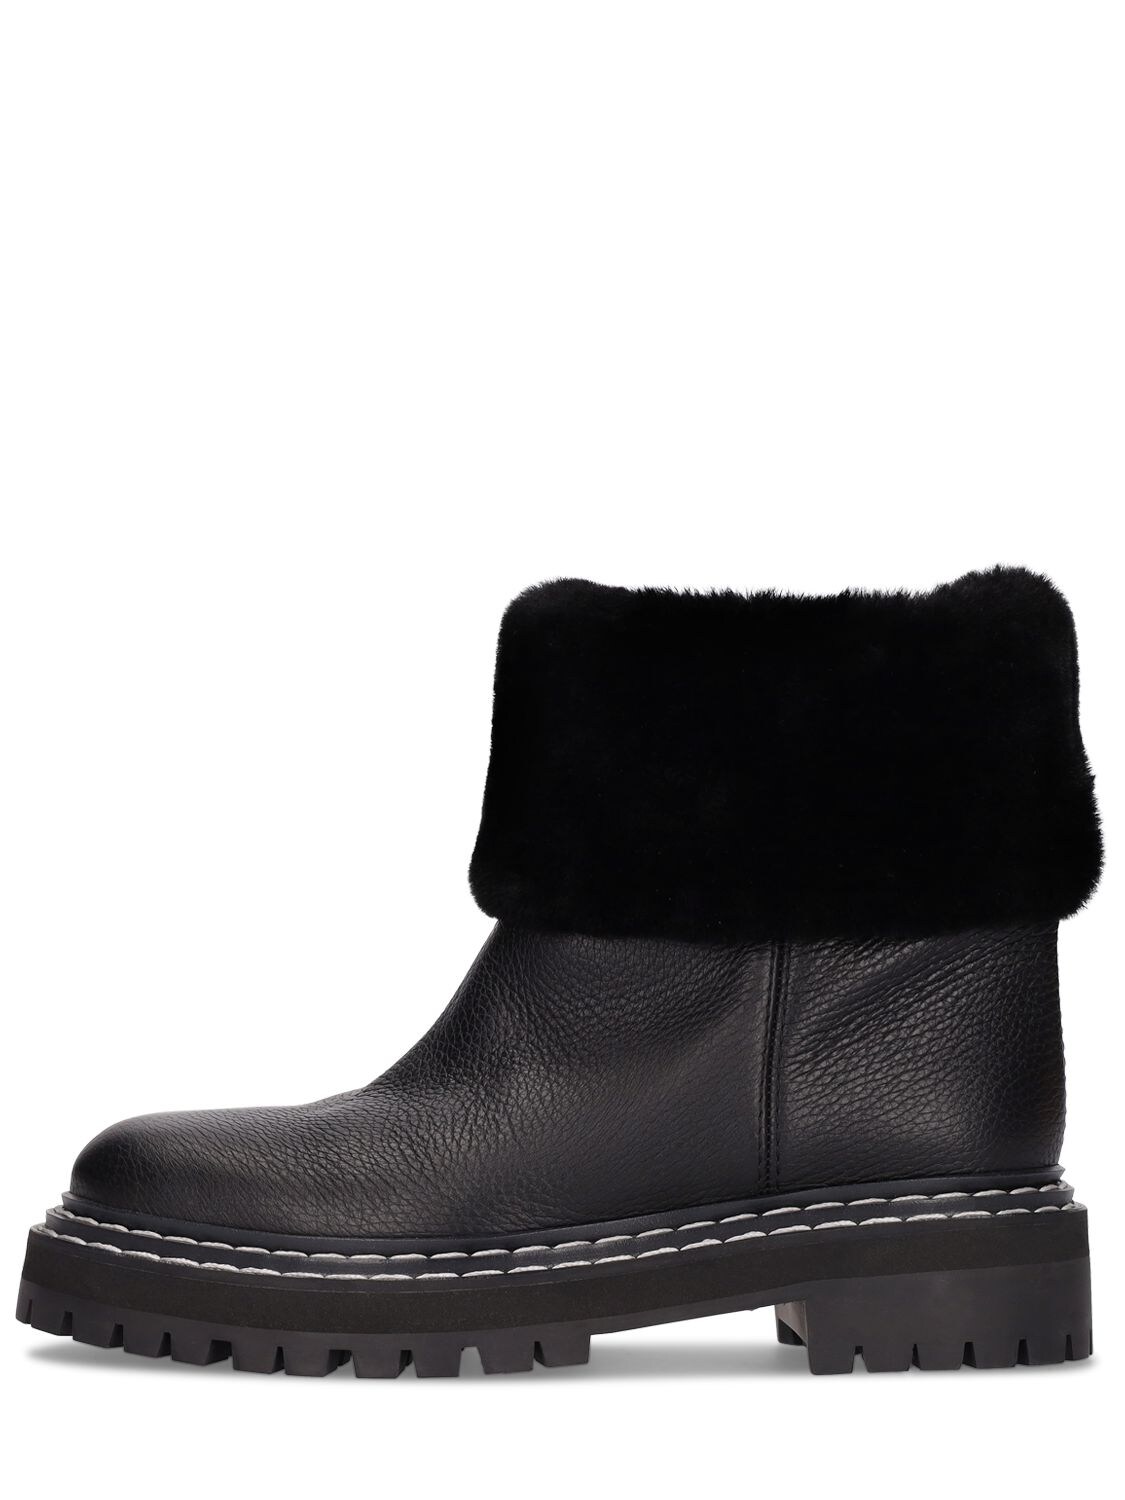 Proenza Schouler - 30mm lug shearling ankle boots - Black | Luisaviaroma